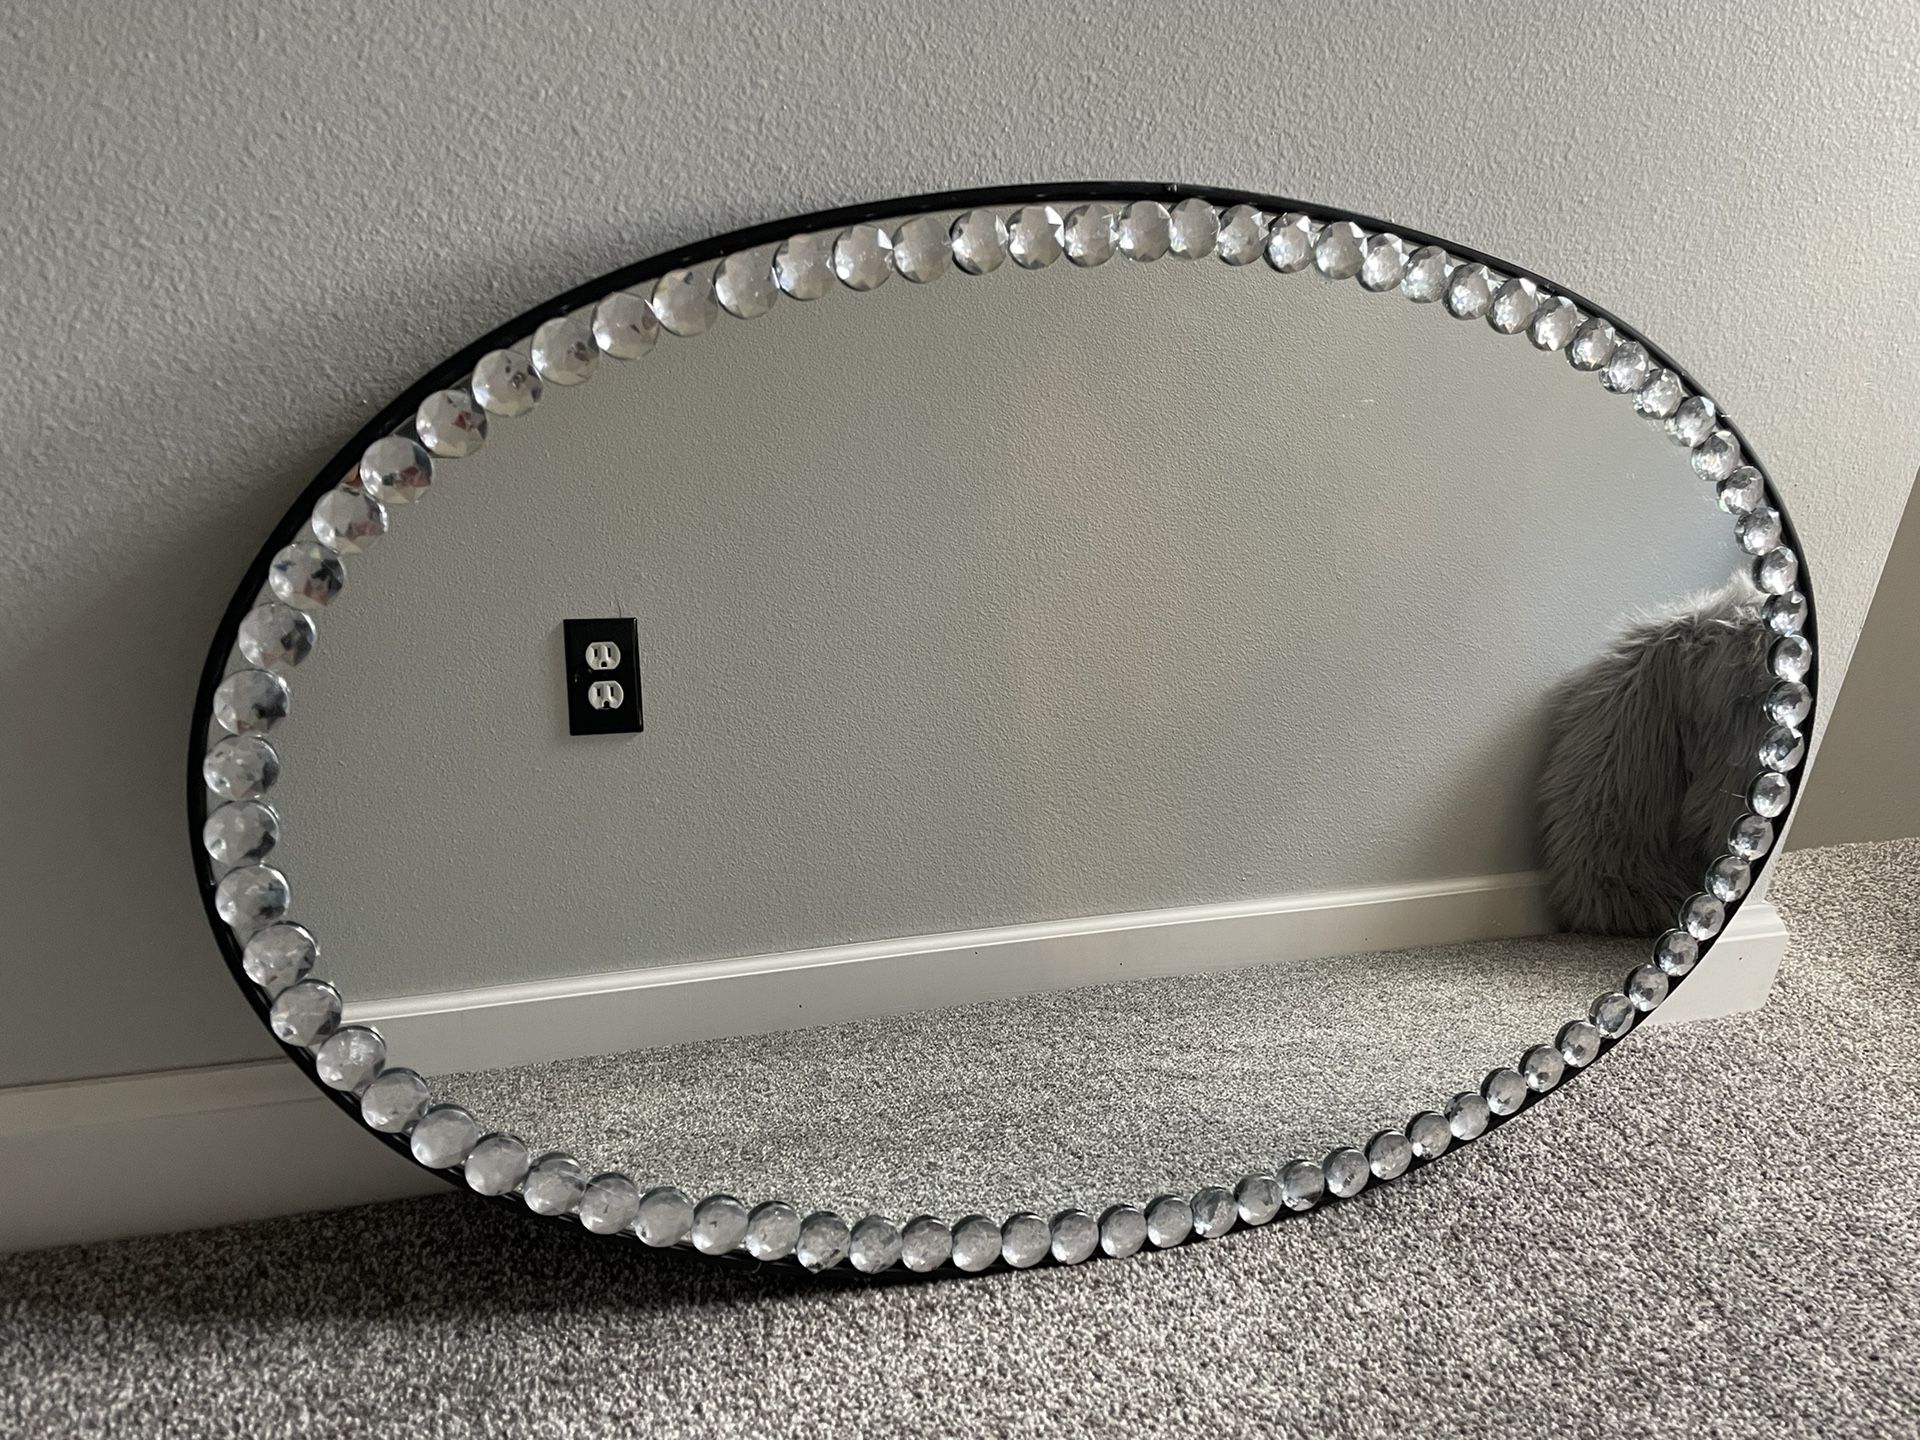 Large, Oval Mirror With Rhinestones